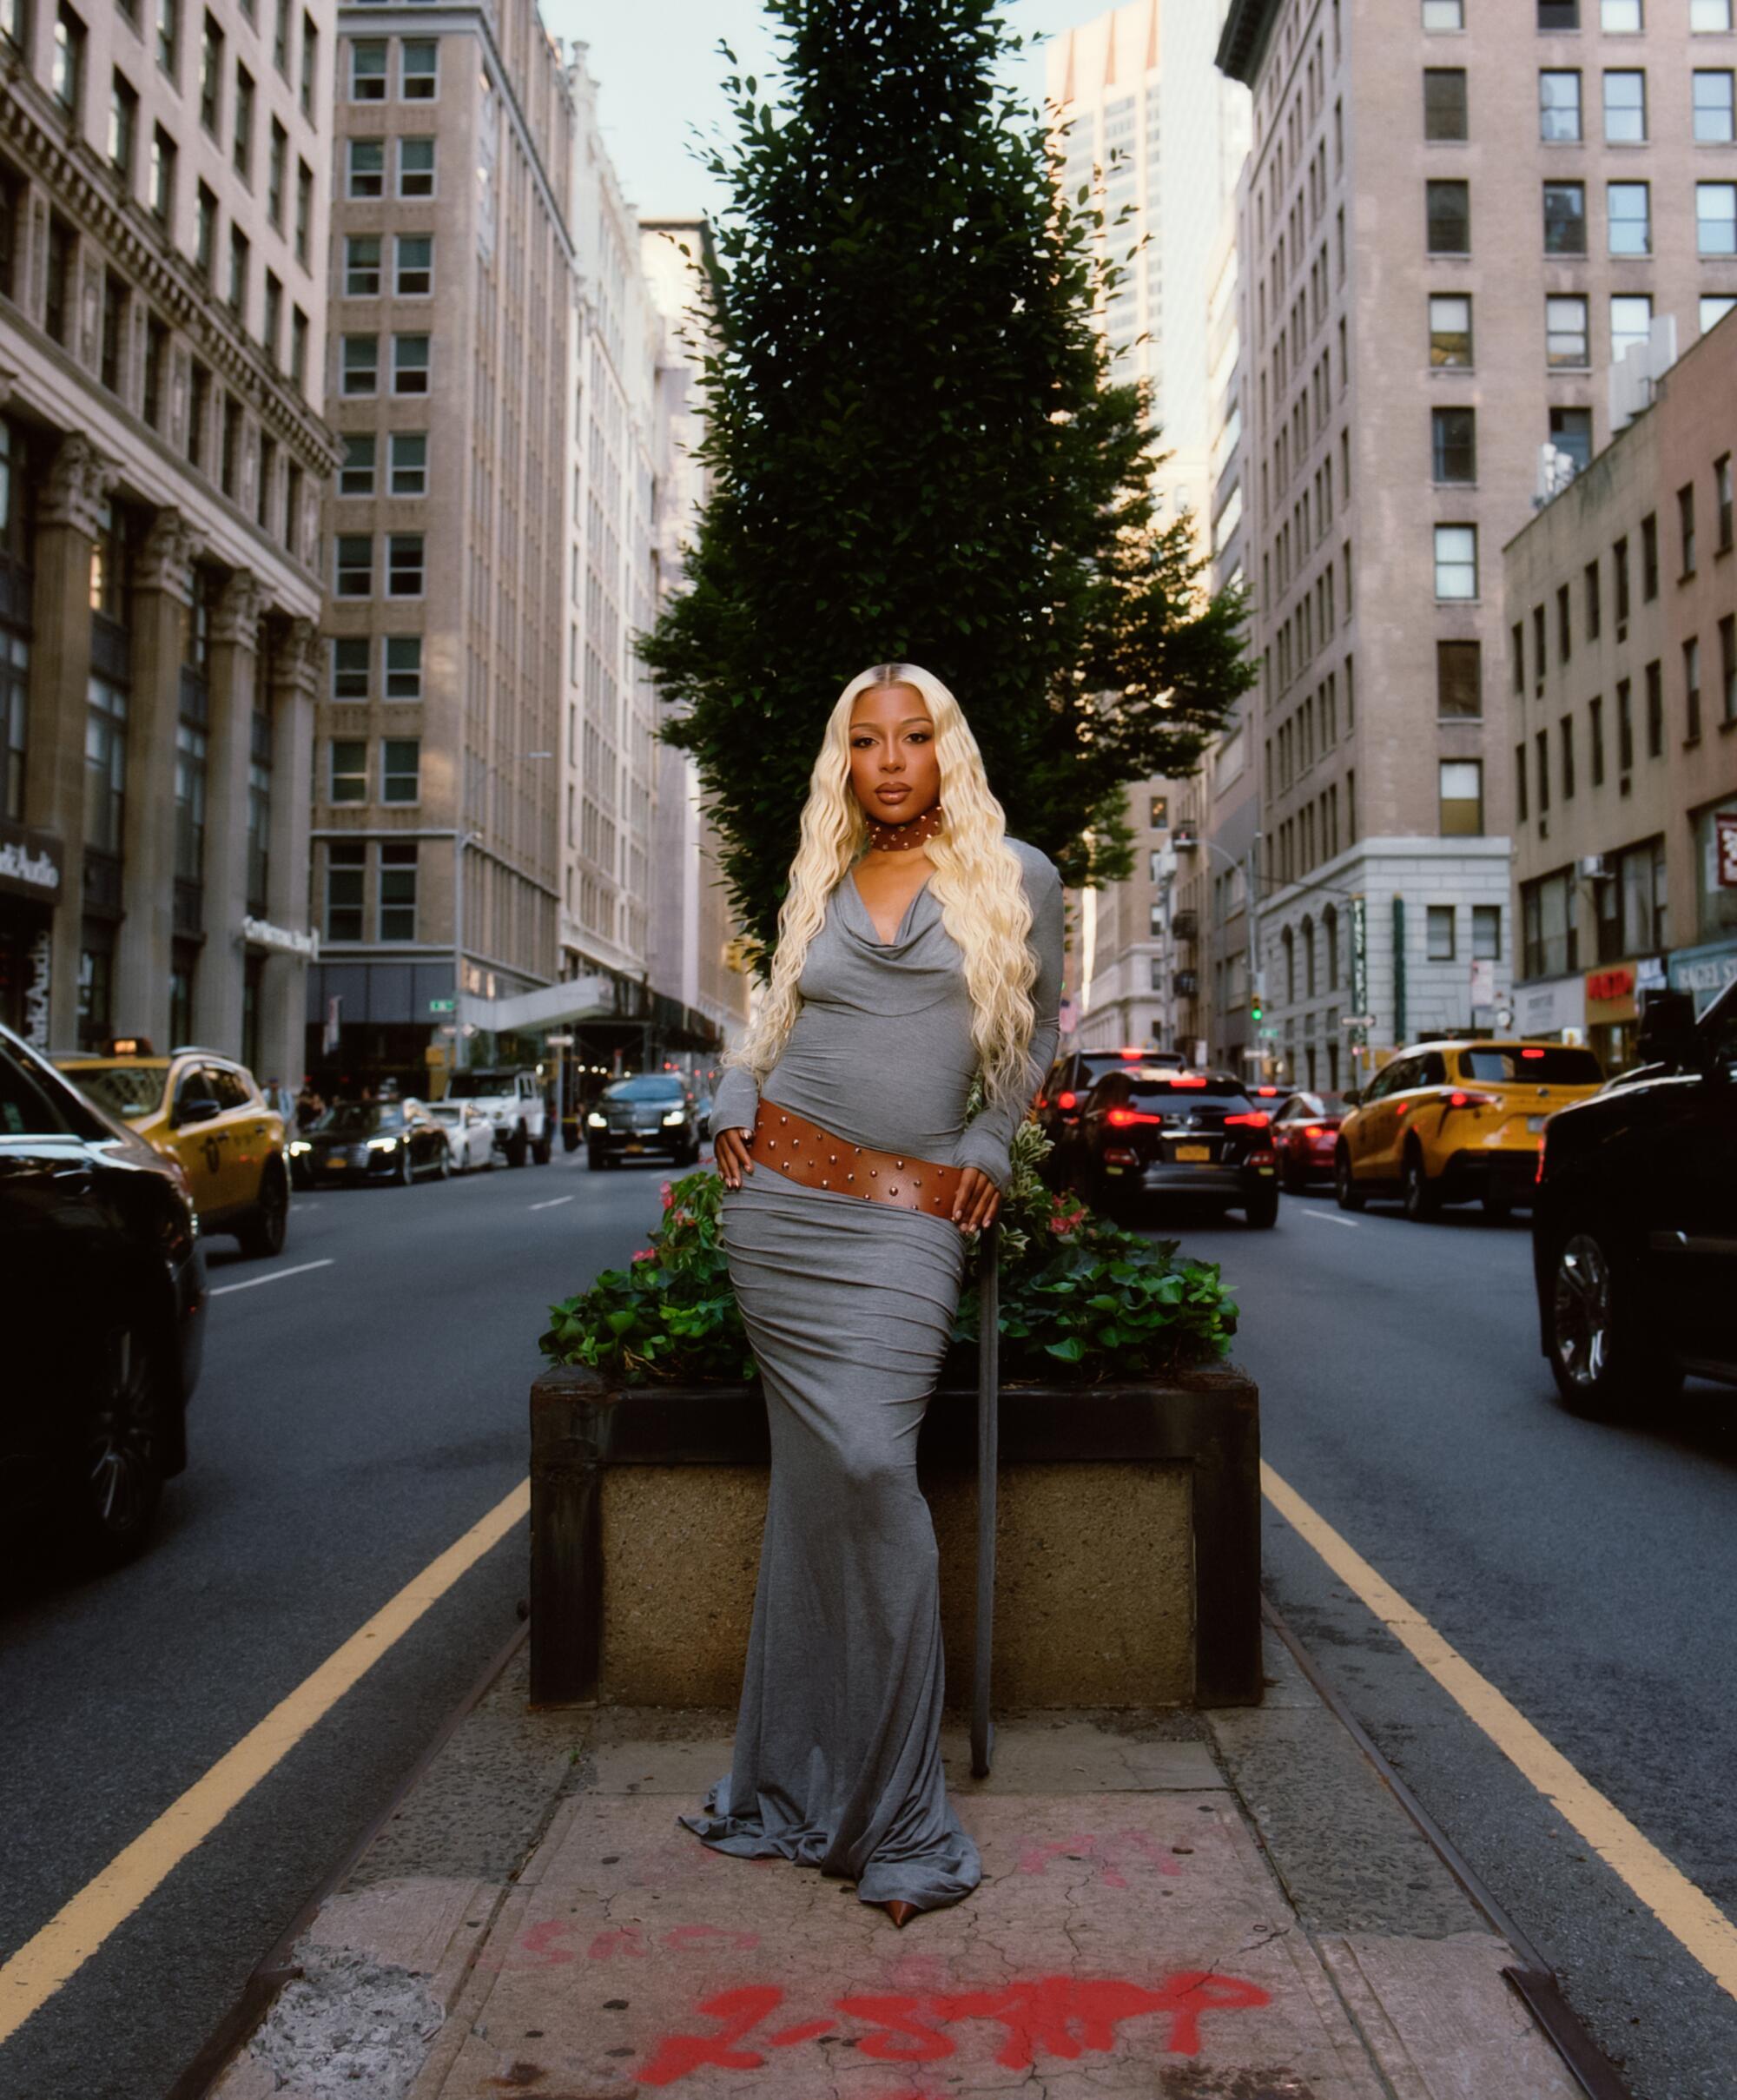 A blond woman stands in front of planter boxes and trees in the middle of a city street.